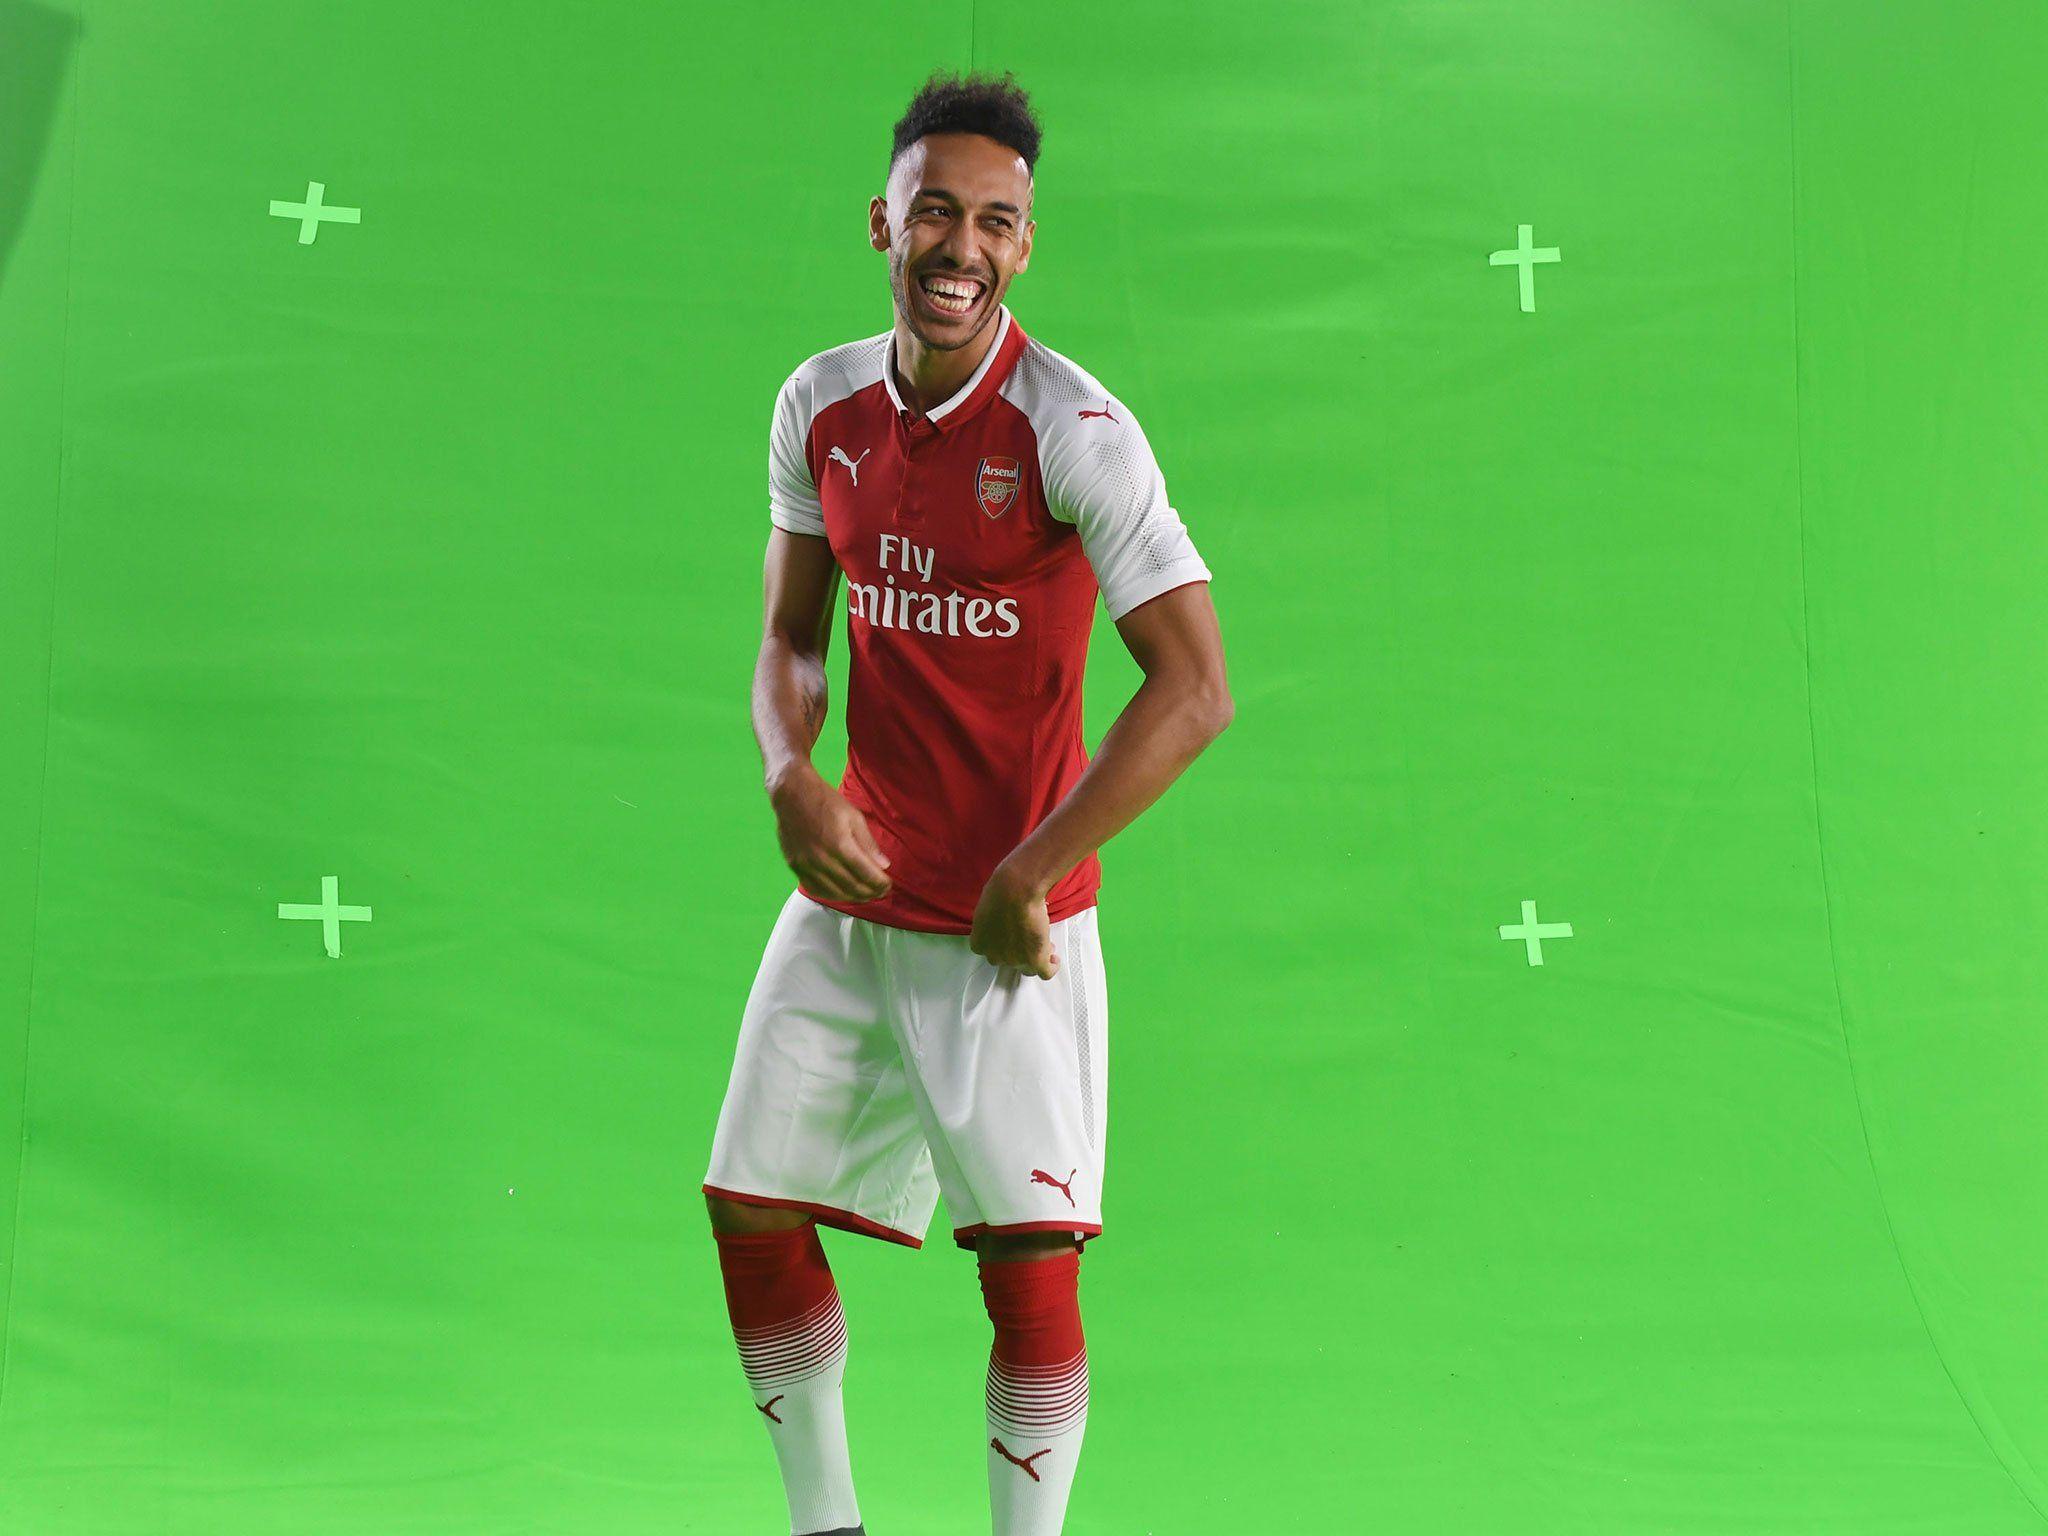 Pierre Emerick Aubameyang Handed Thierry Henry's No 14 Shirt At